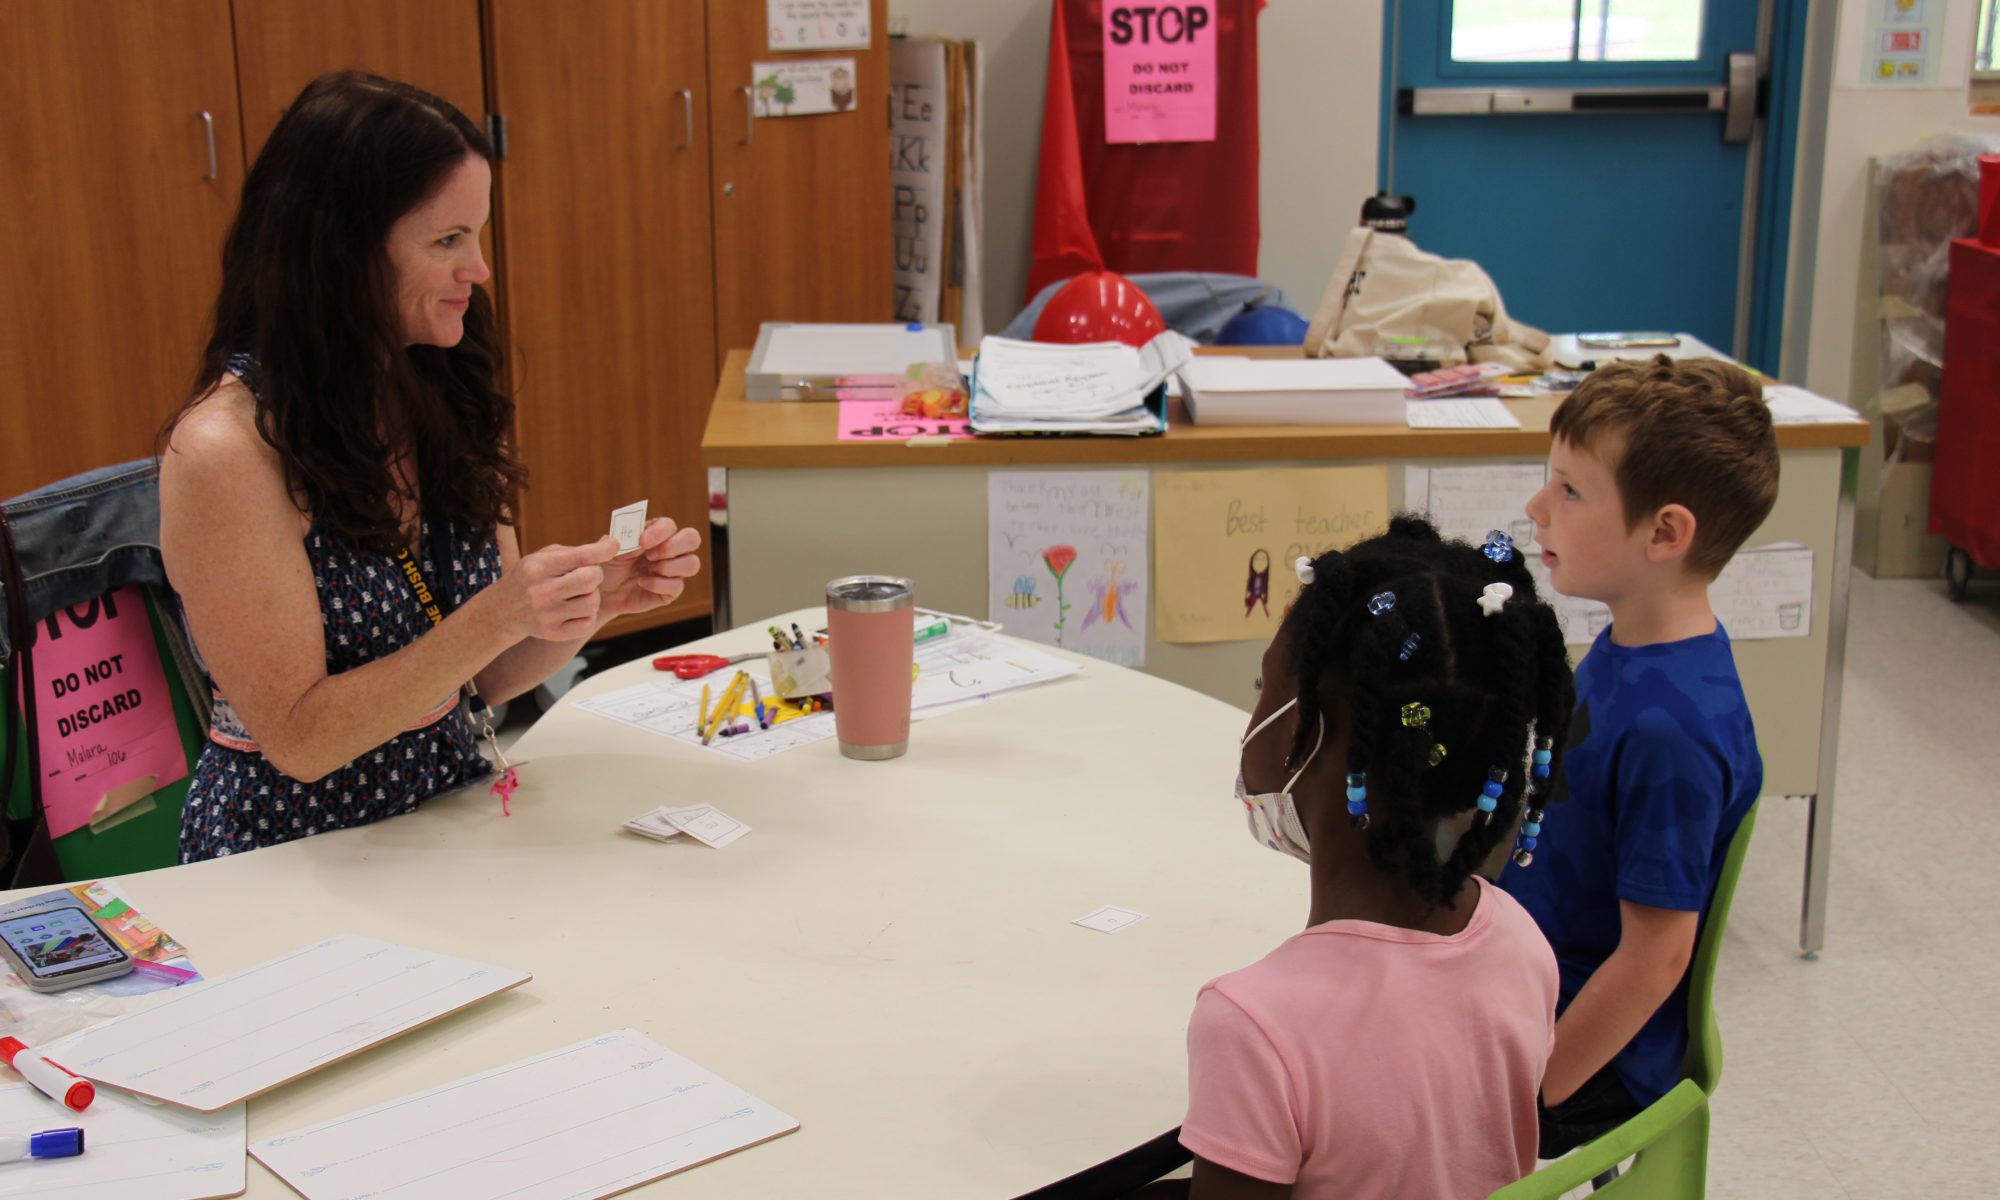 A woman with long dark hair holds up a piece of paper. She is sitting at a table with two young students, a boy wearing a blue shirt and a girl wearing a pink shirt. They are looking at the teacher.